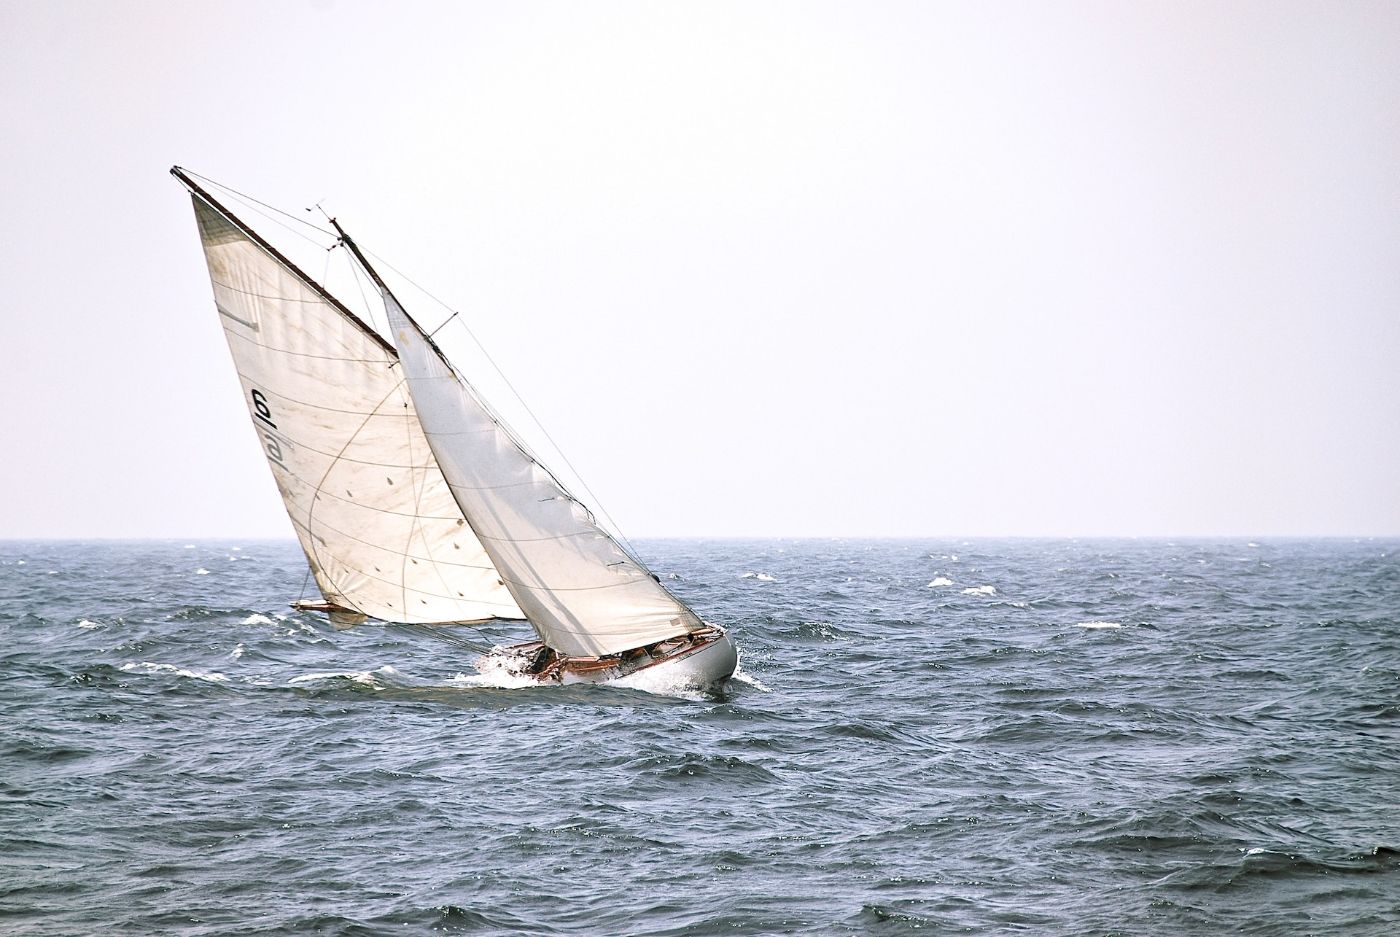 the small sailboat careened in the rough sea